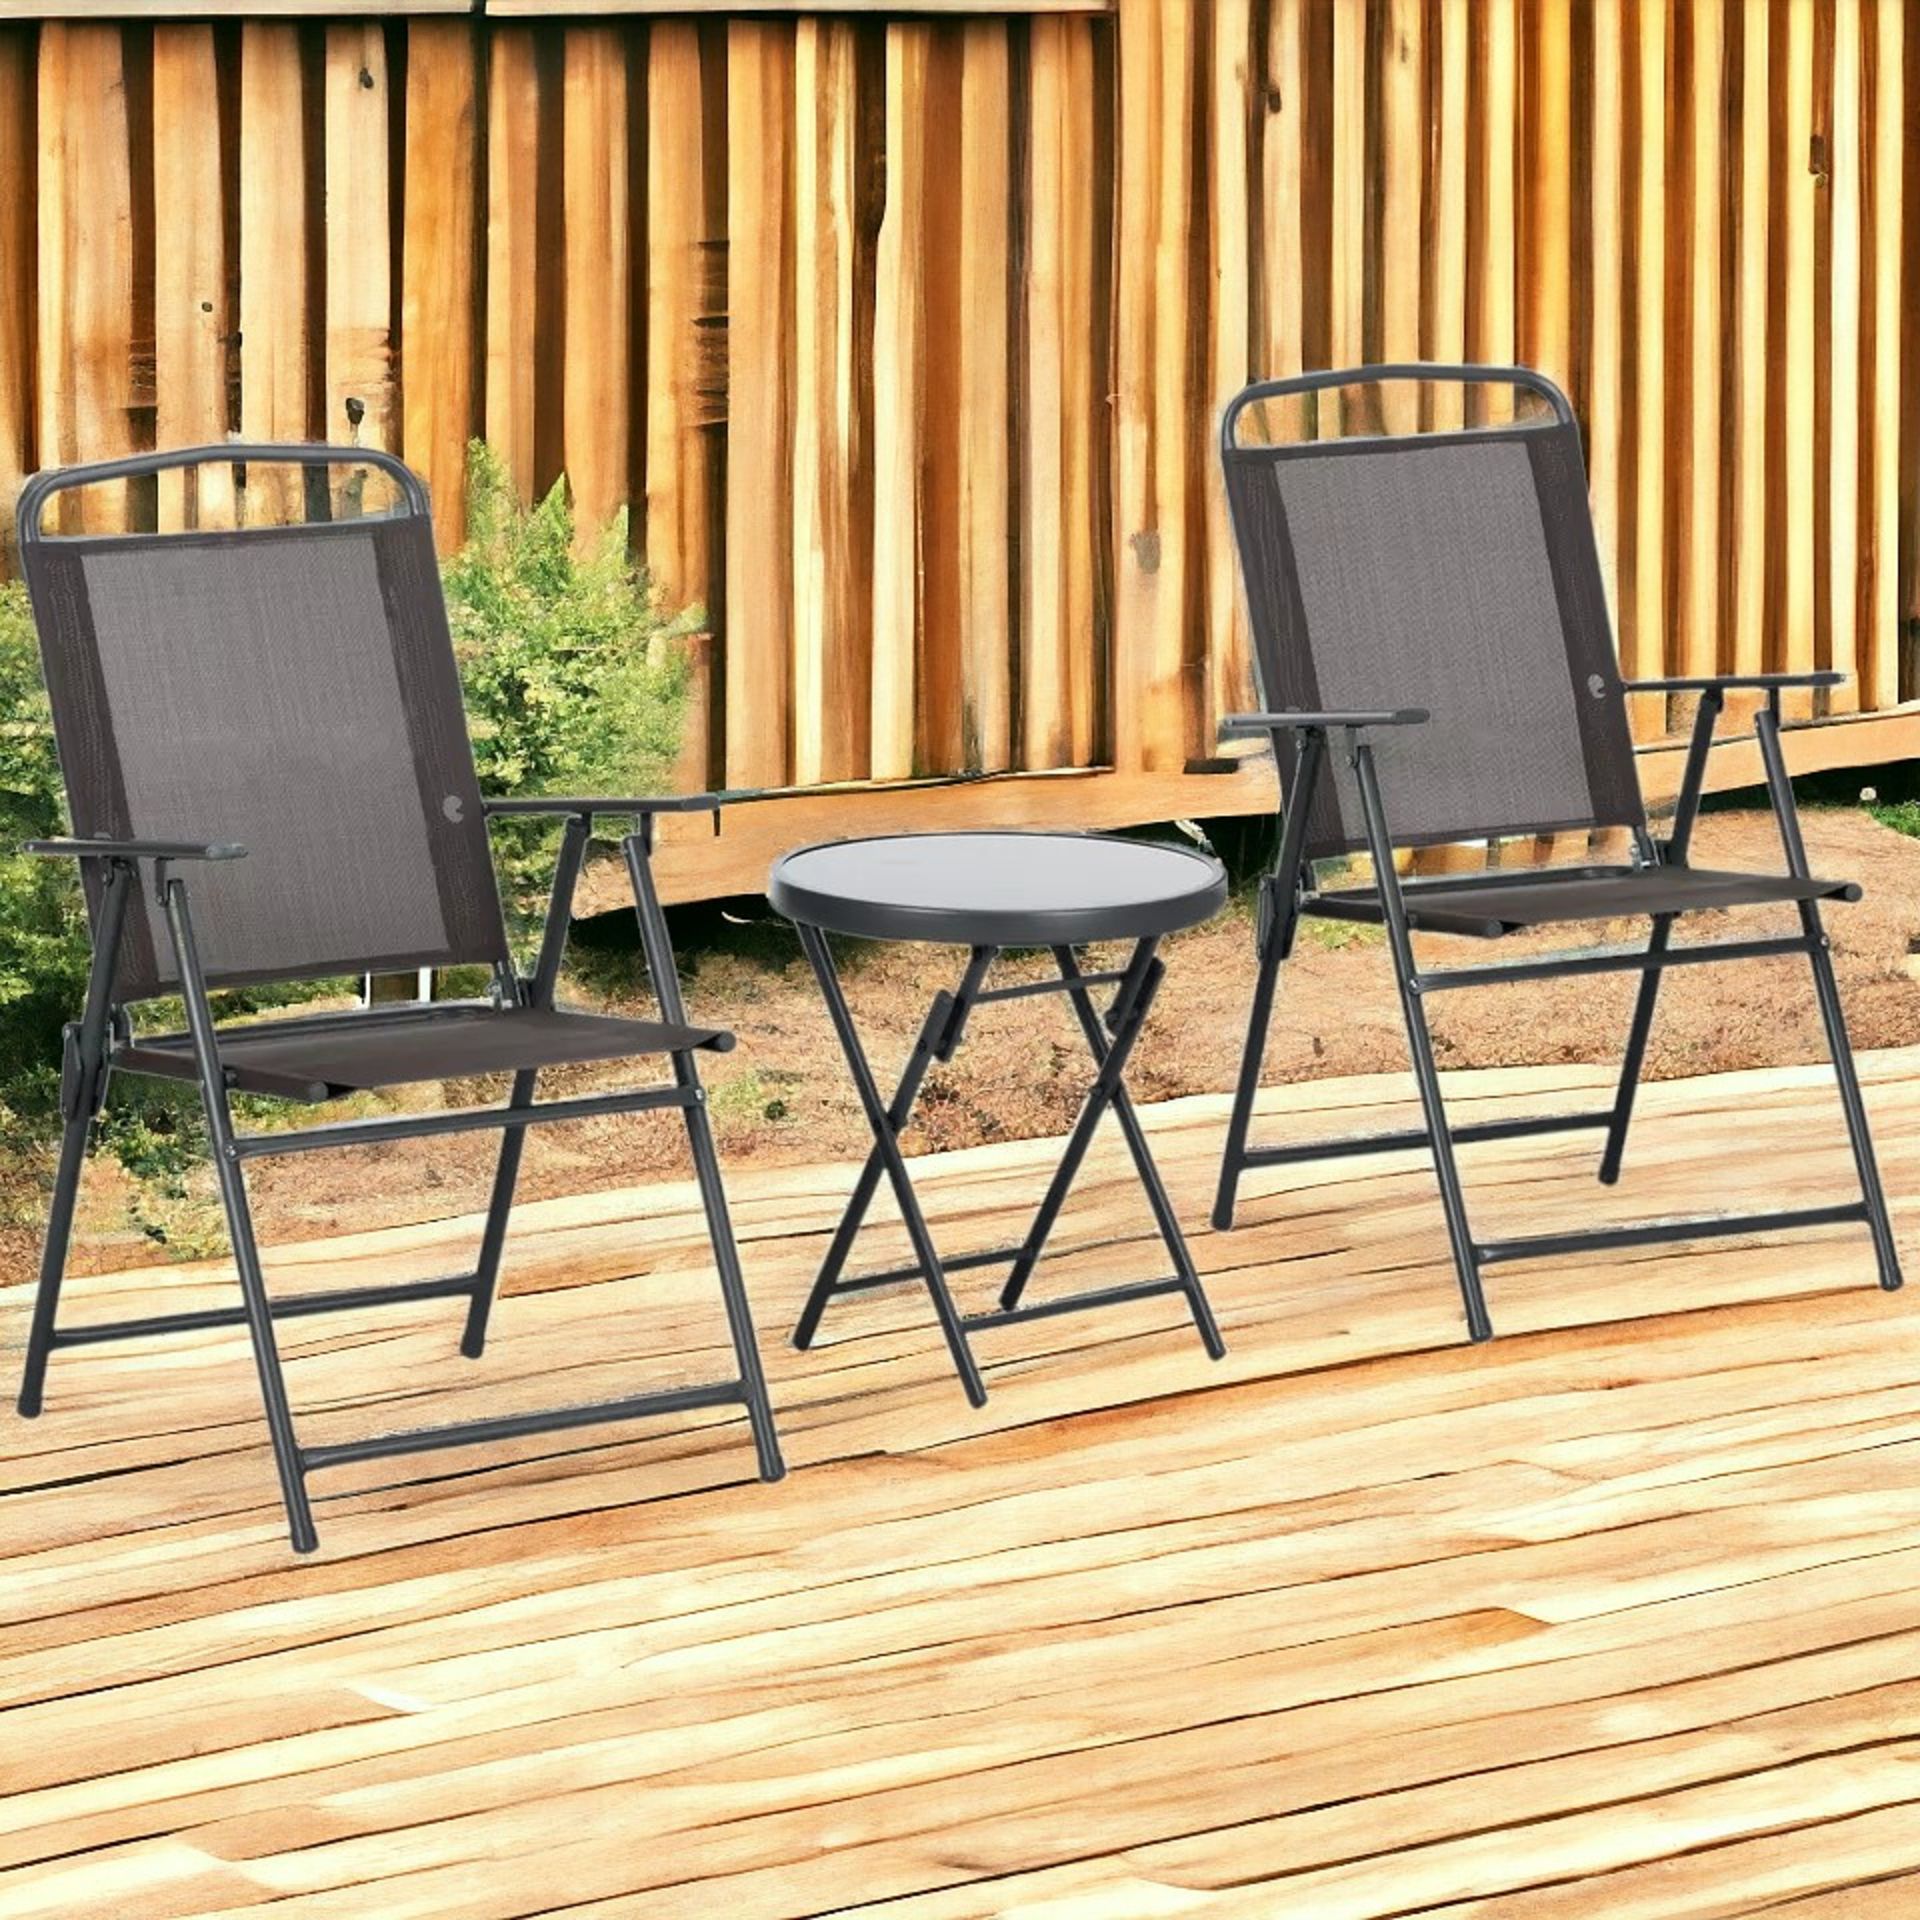 FREE DELIVERY - BRAND NEW PATIO BISTRO SET FOLDING CHAIRS & COFFEE TABLE ,BROWN